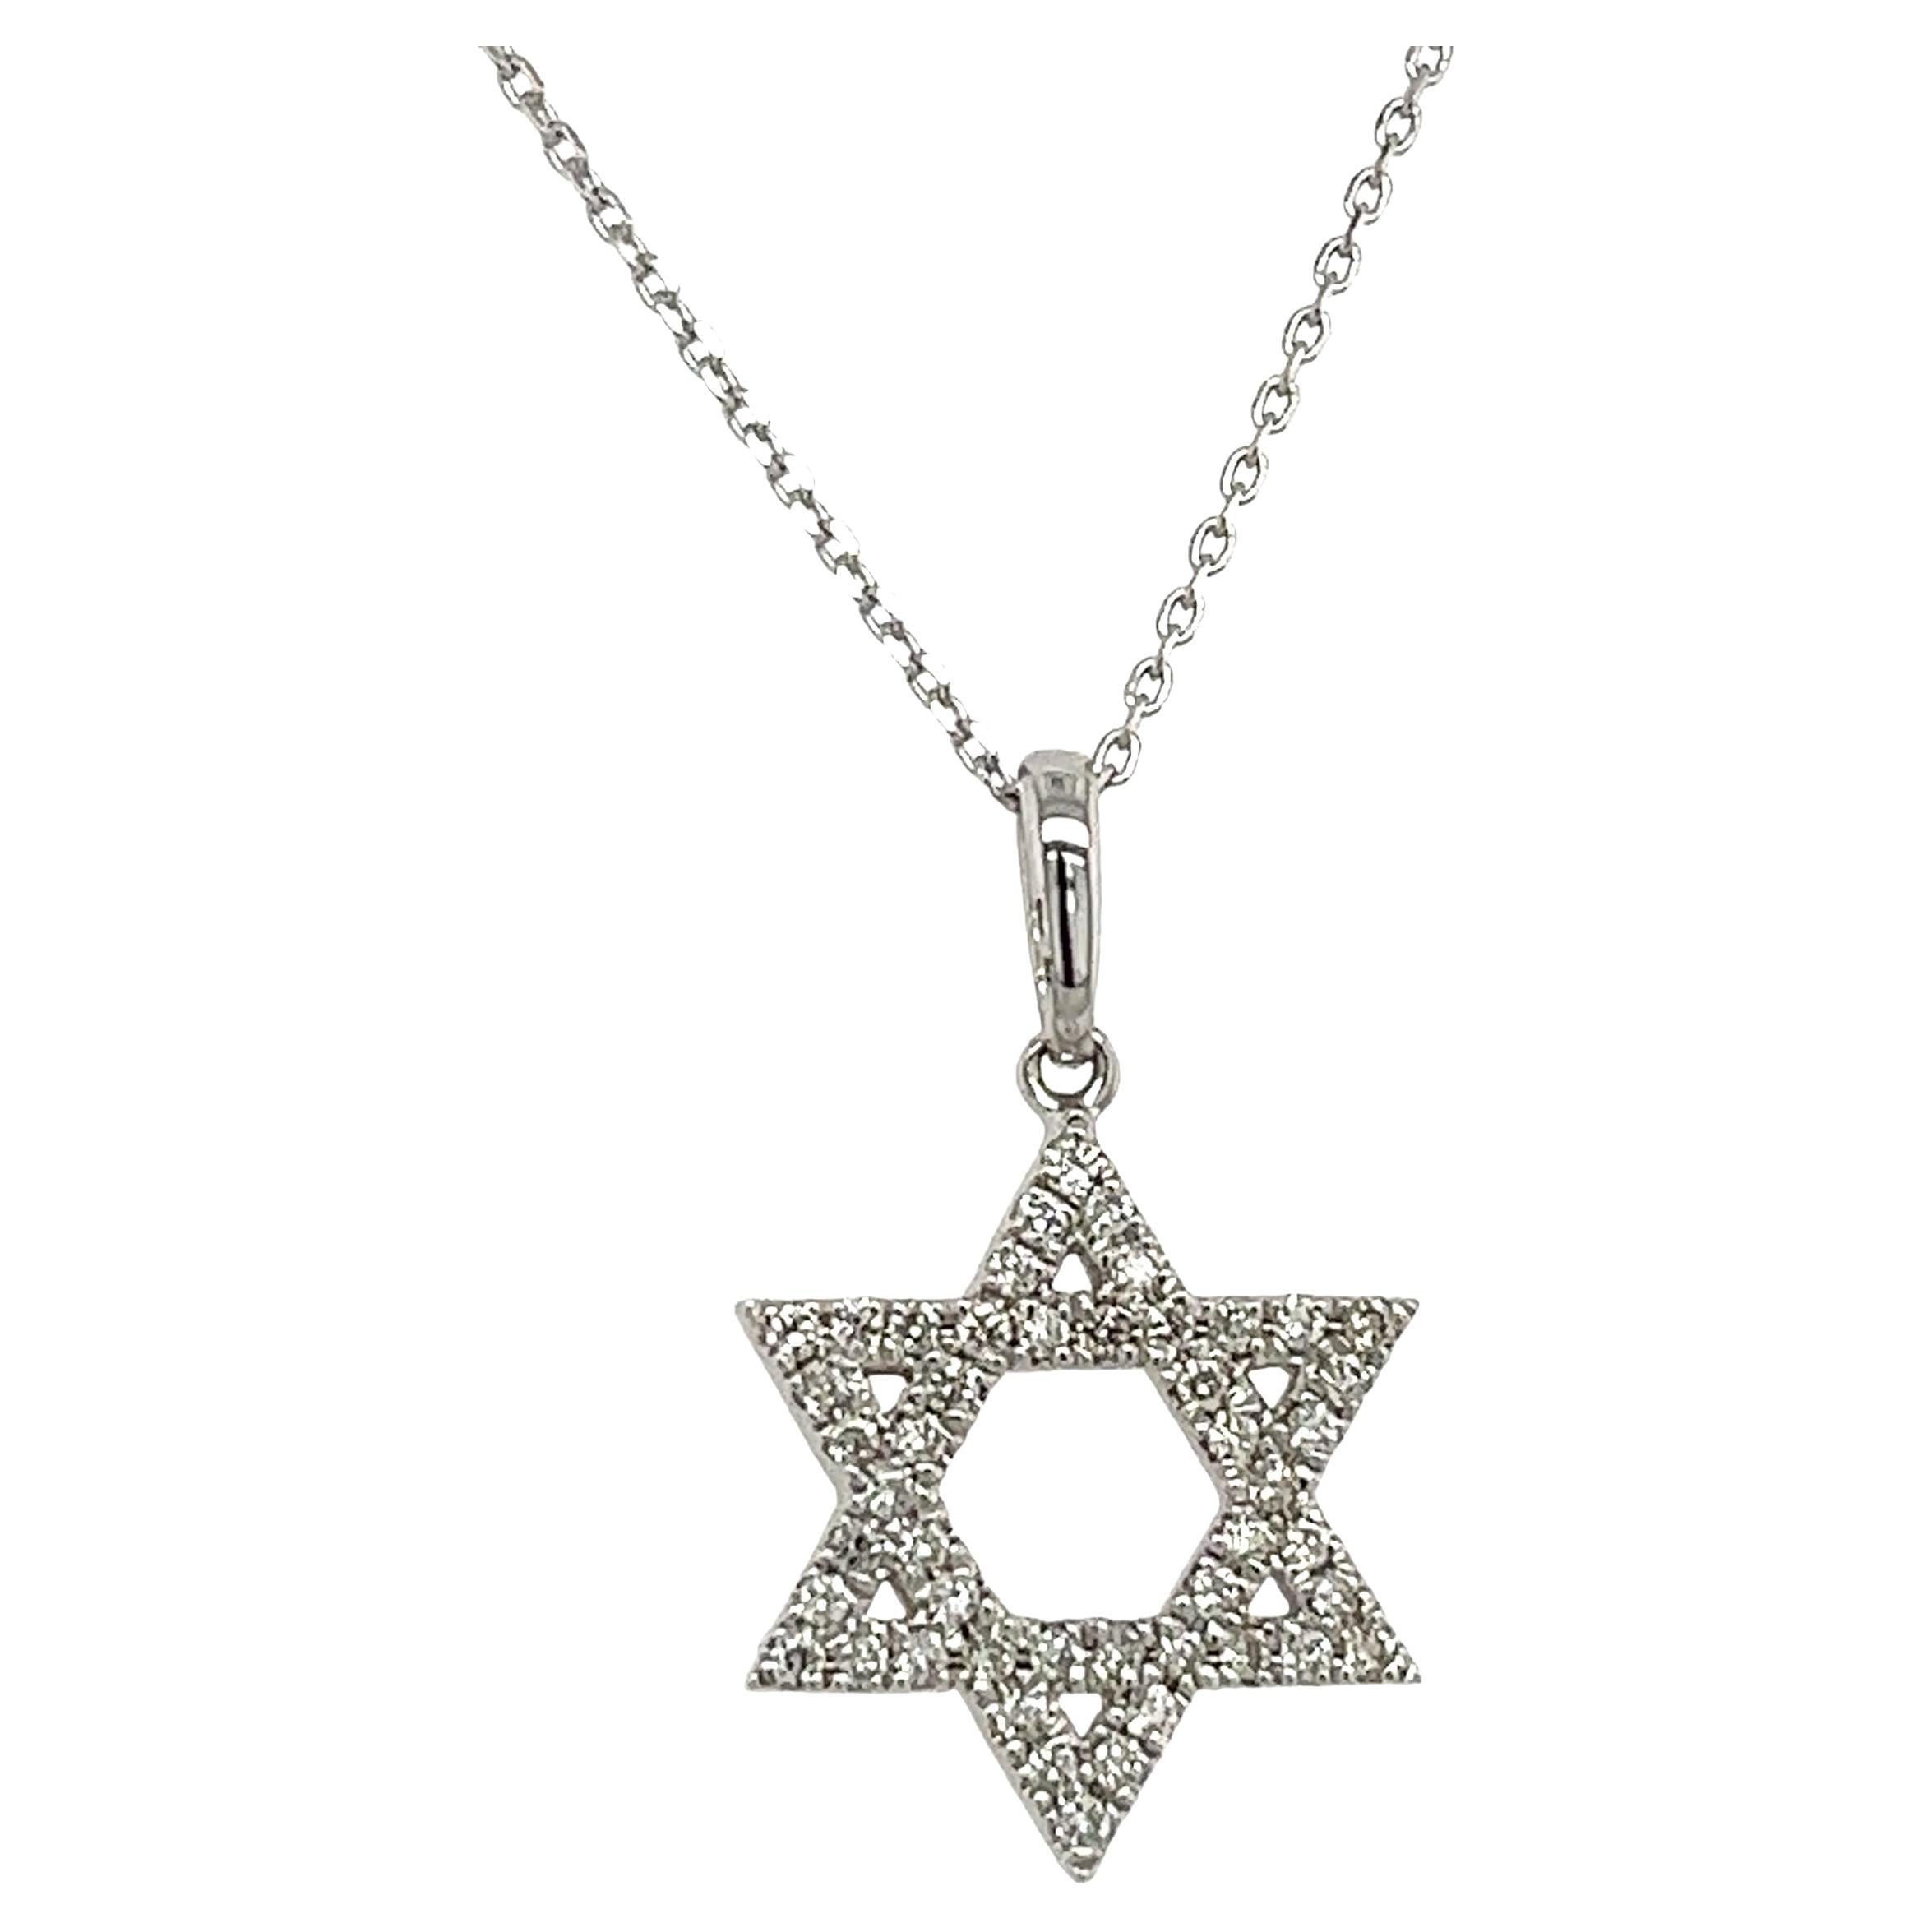 New 9ct White Gold Diamond Star of David Necklace, With 0.20ct of Diamonds